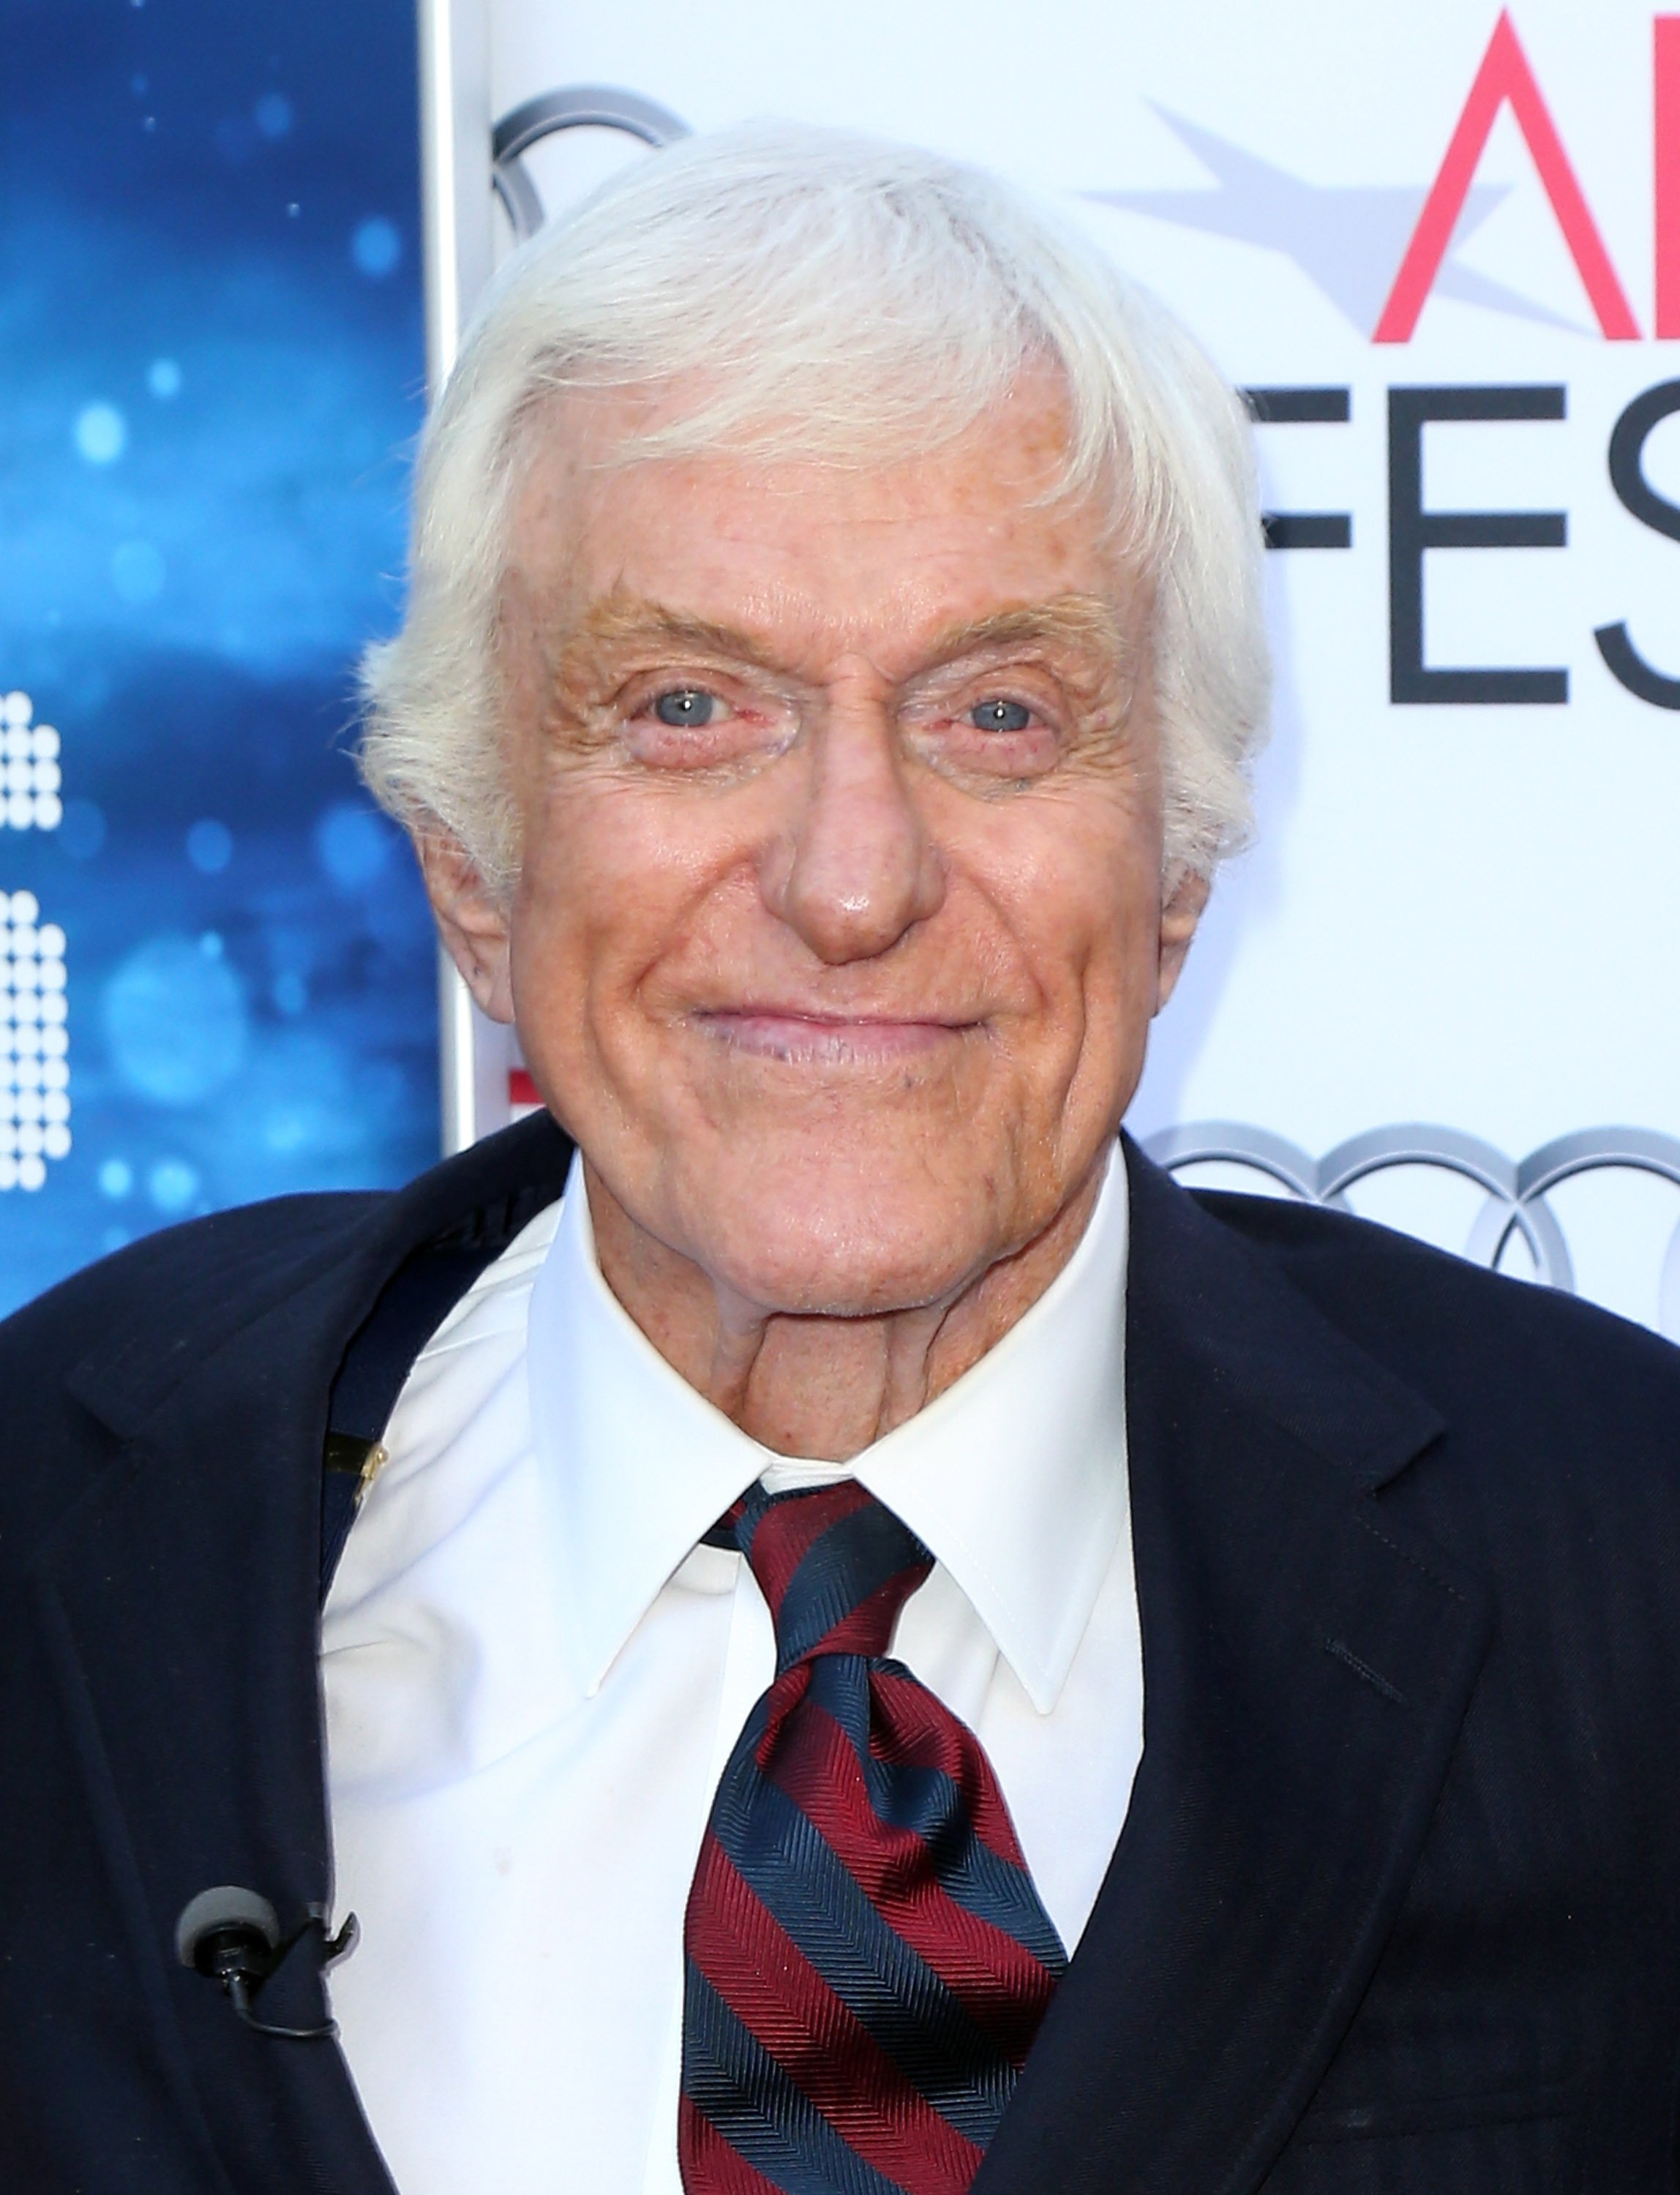 Dick Van Dyke attends the AFI Fest 2013 in Hollywood, California on November 9, 2013 | Photo: Getty Images